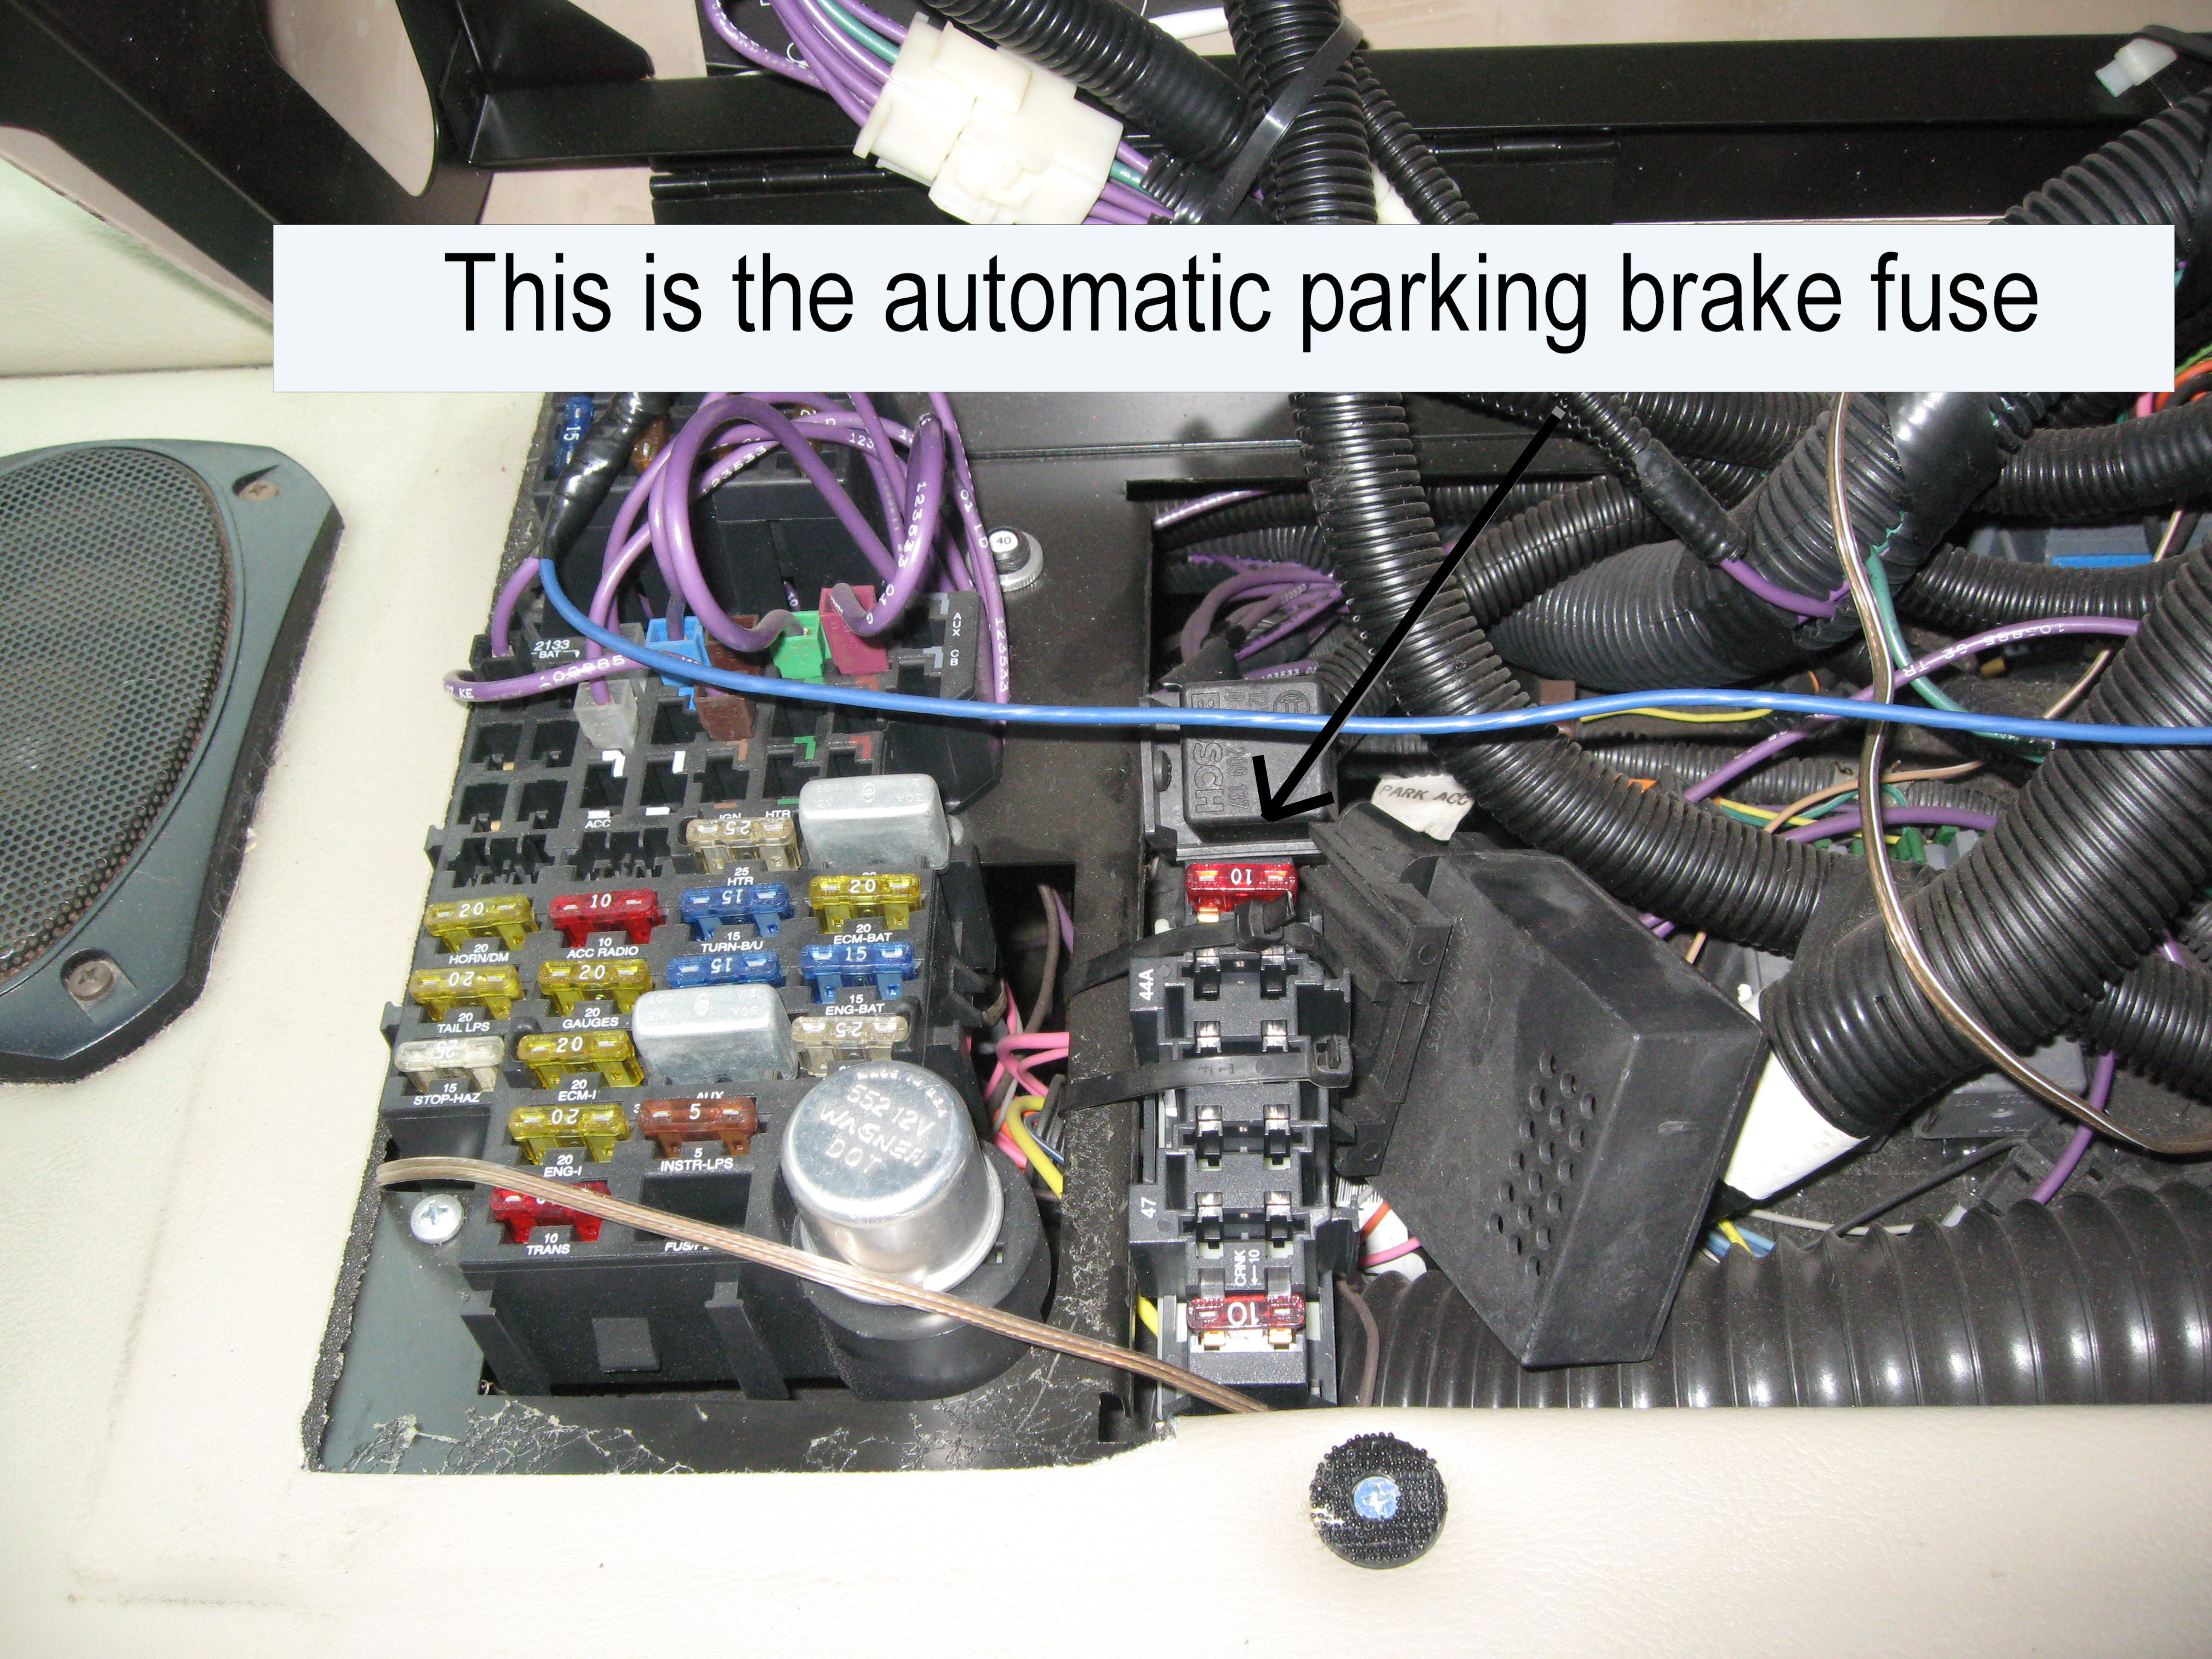 Chevy P-30 Auto Parking Brake (welcome to our nightmare)  Wolf's Words